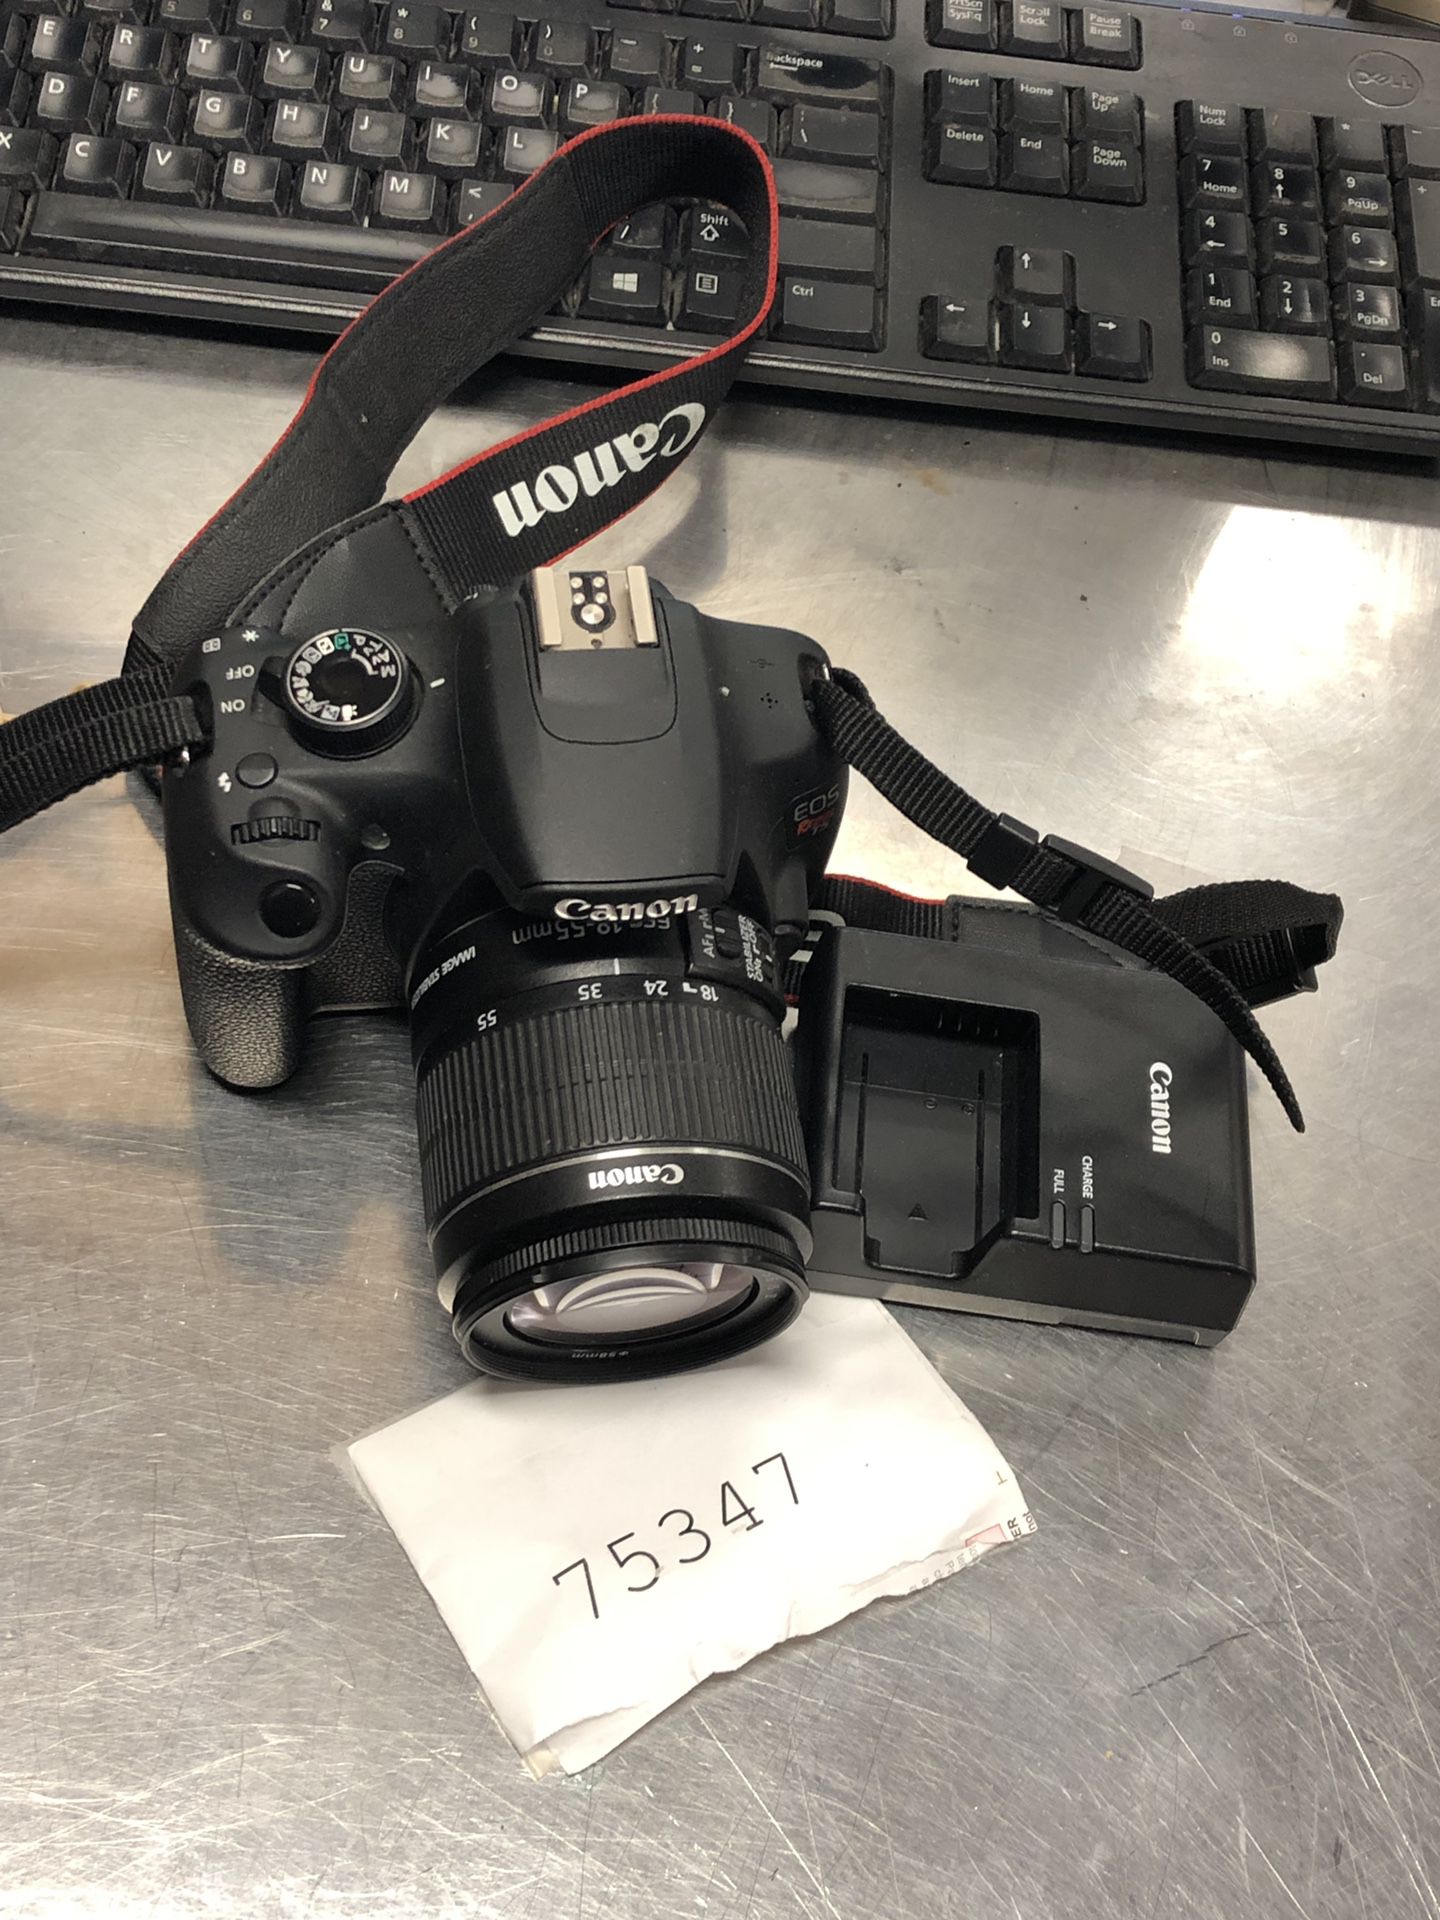 Canon rebel T5 digital camera with the lens and charger